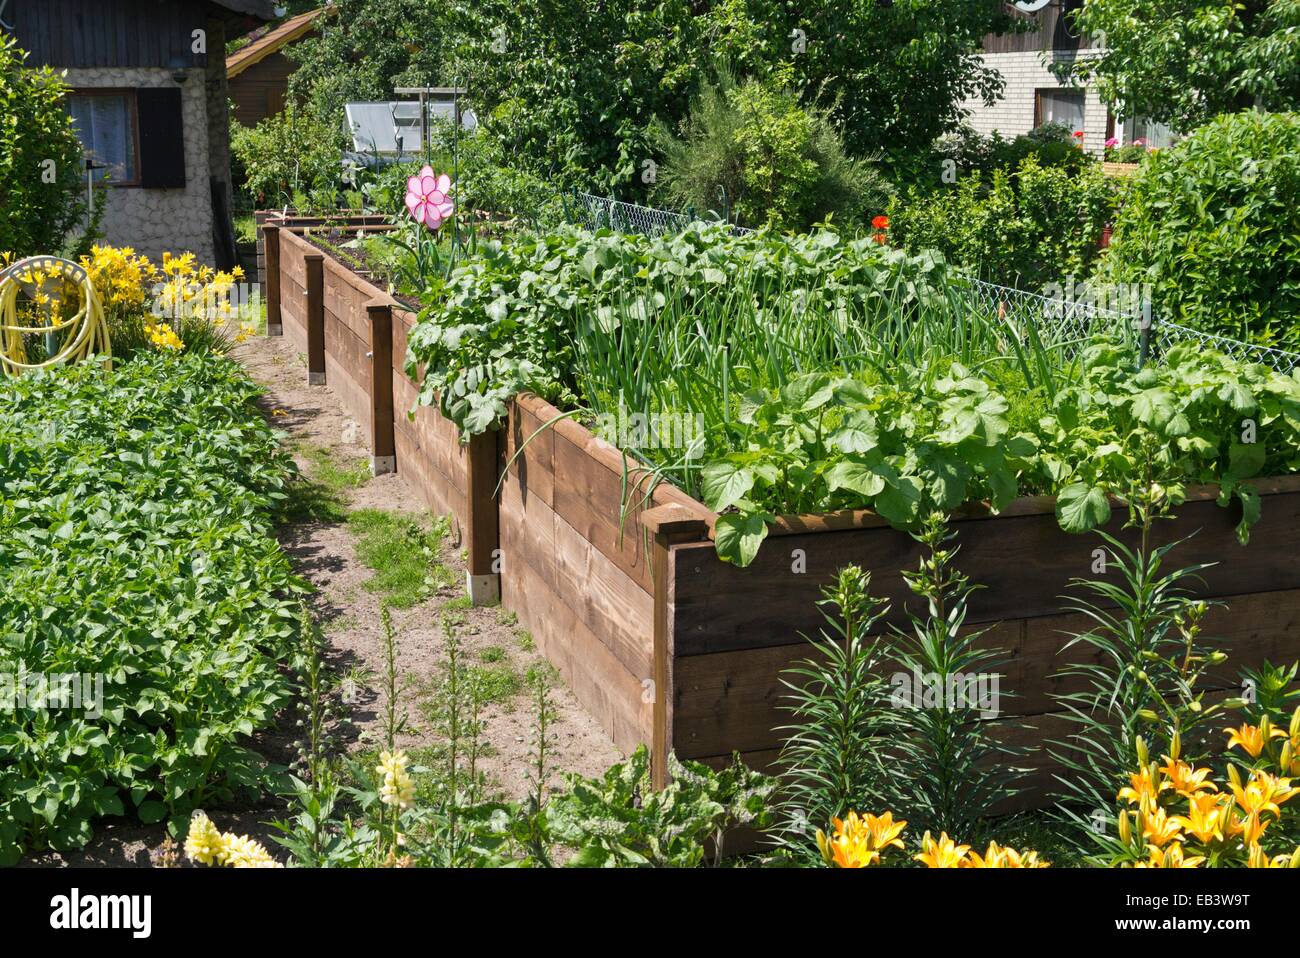 Raised beds in an allotment garden Stock Photo